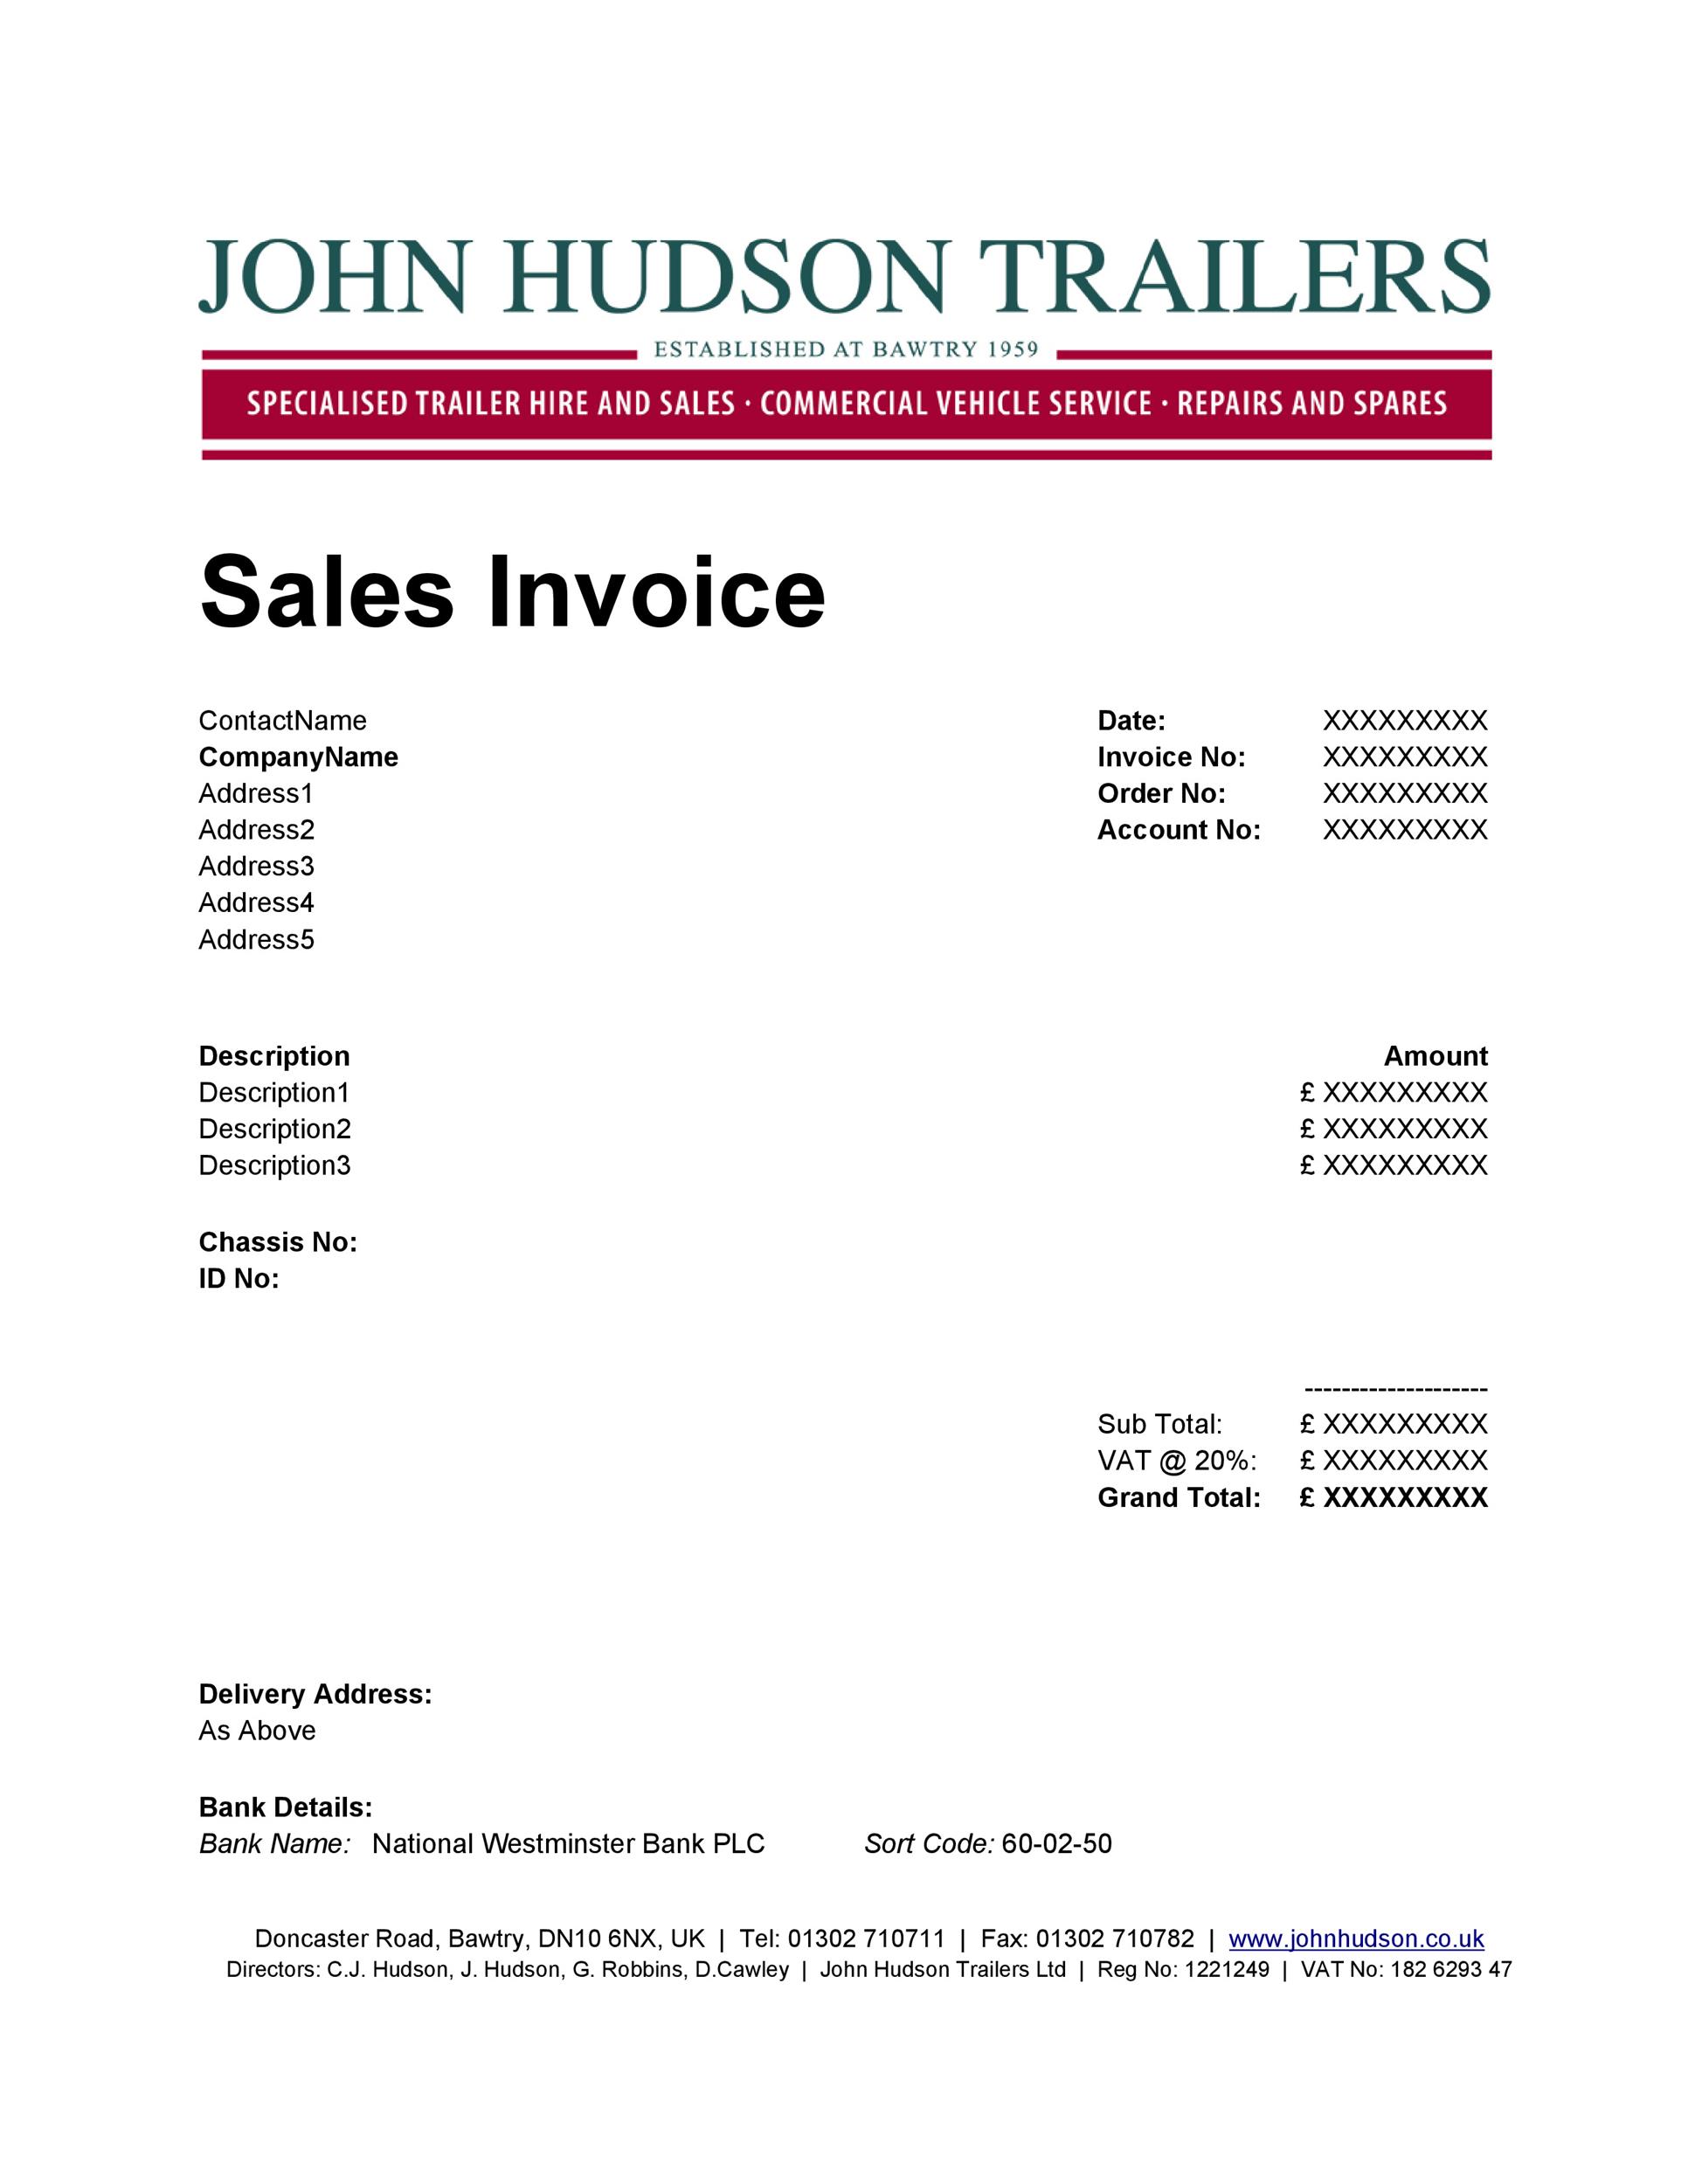 Sale Invoice Templates 11+ Free Word, Excel & PDF Formats, Samples